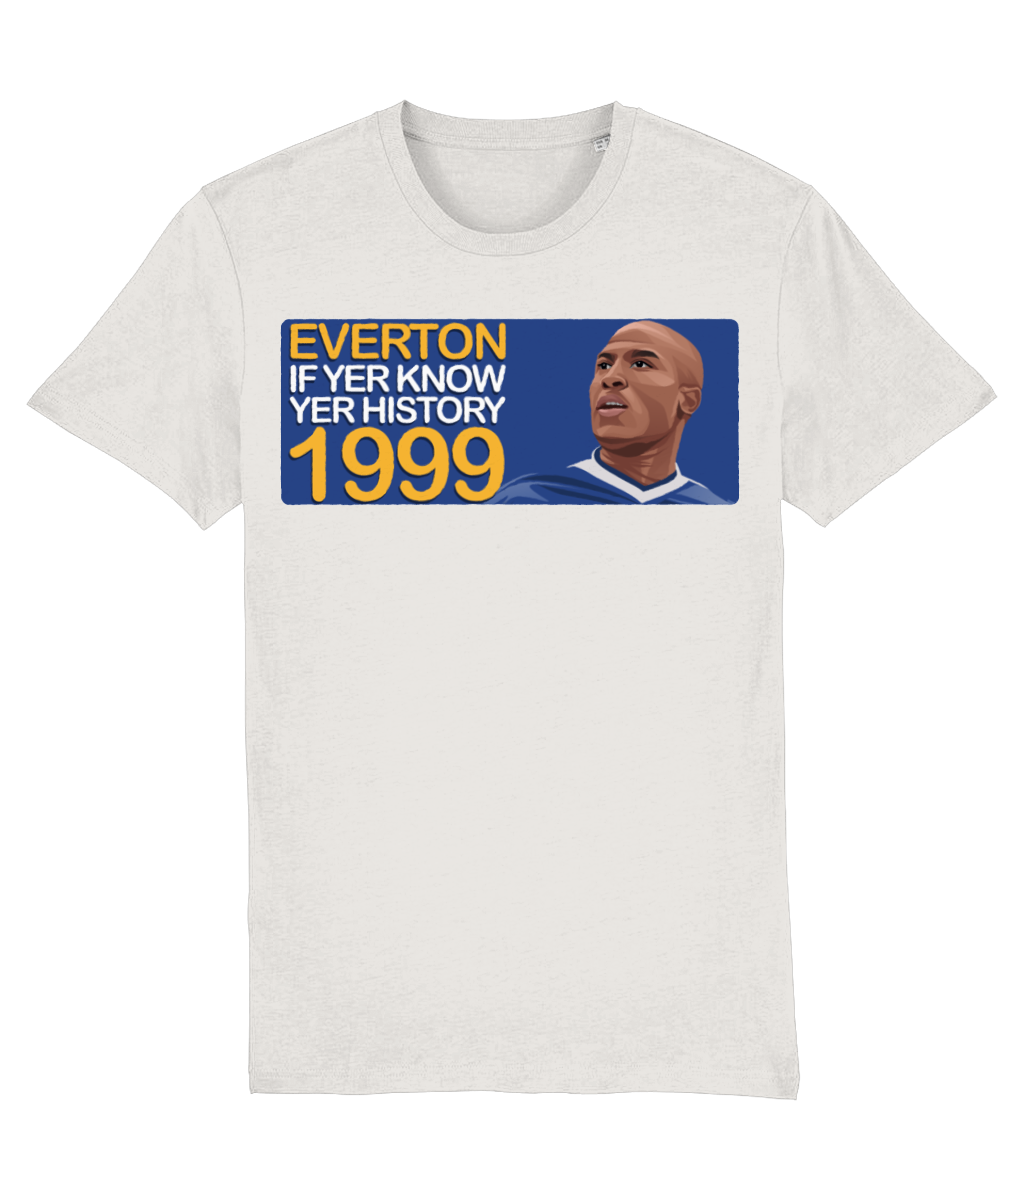 Everton 1999 Kevin Campbell If Yer Know Yer History Unisex T-Shirt Stanley/Stella Retrotext Vintage White XX-Small 